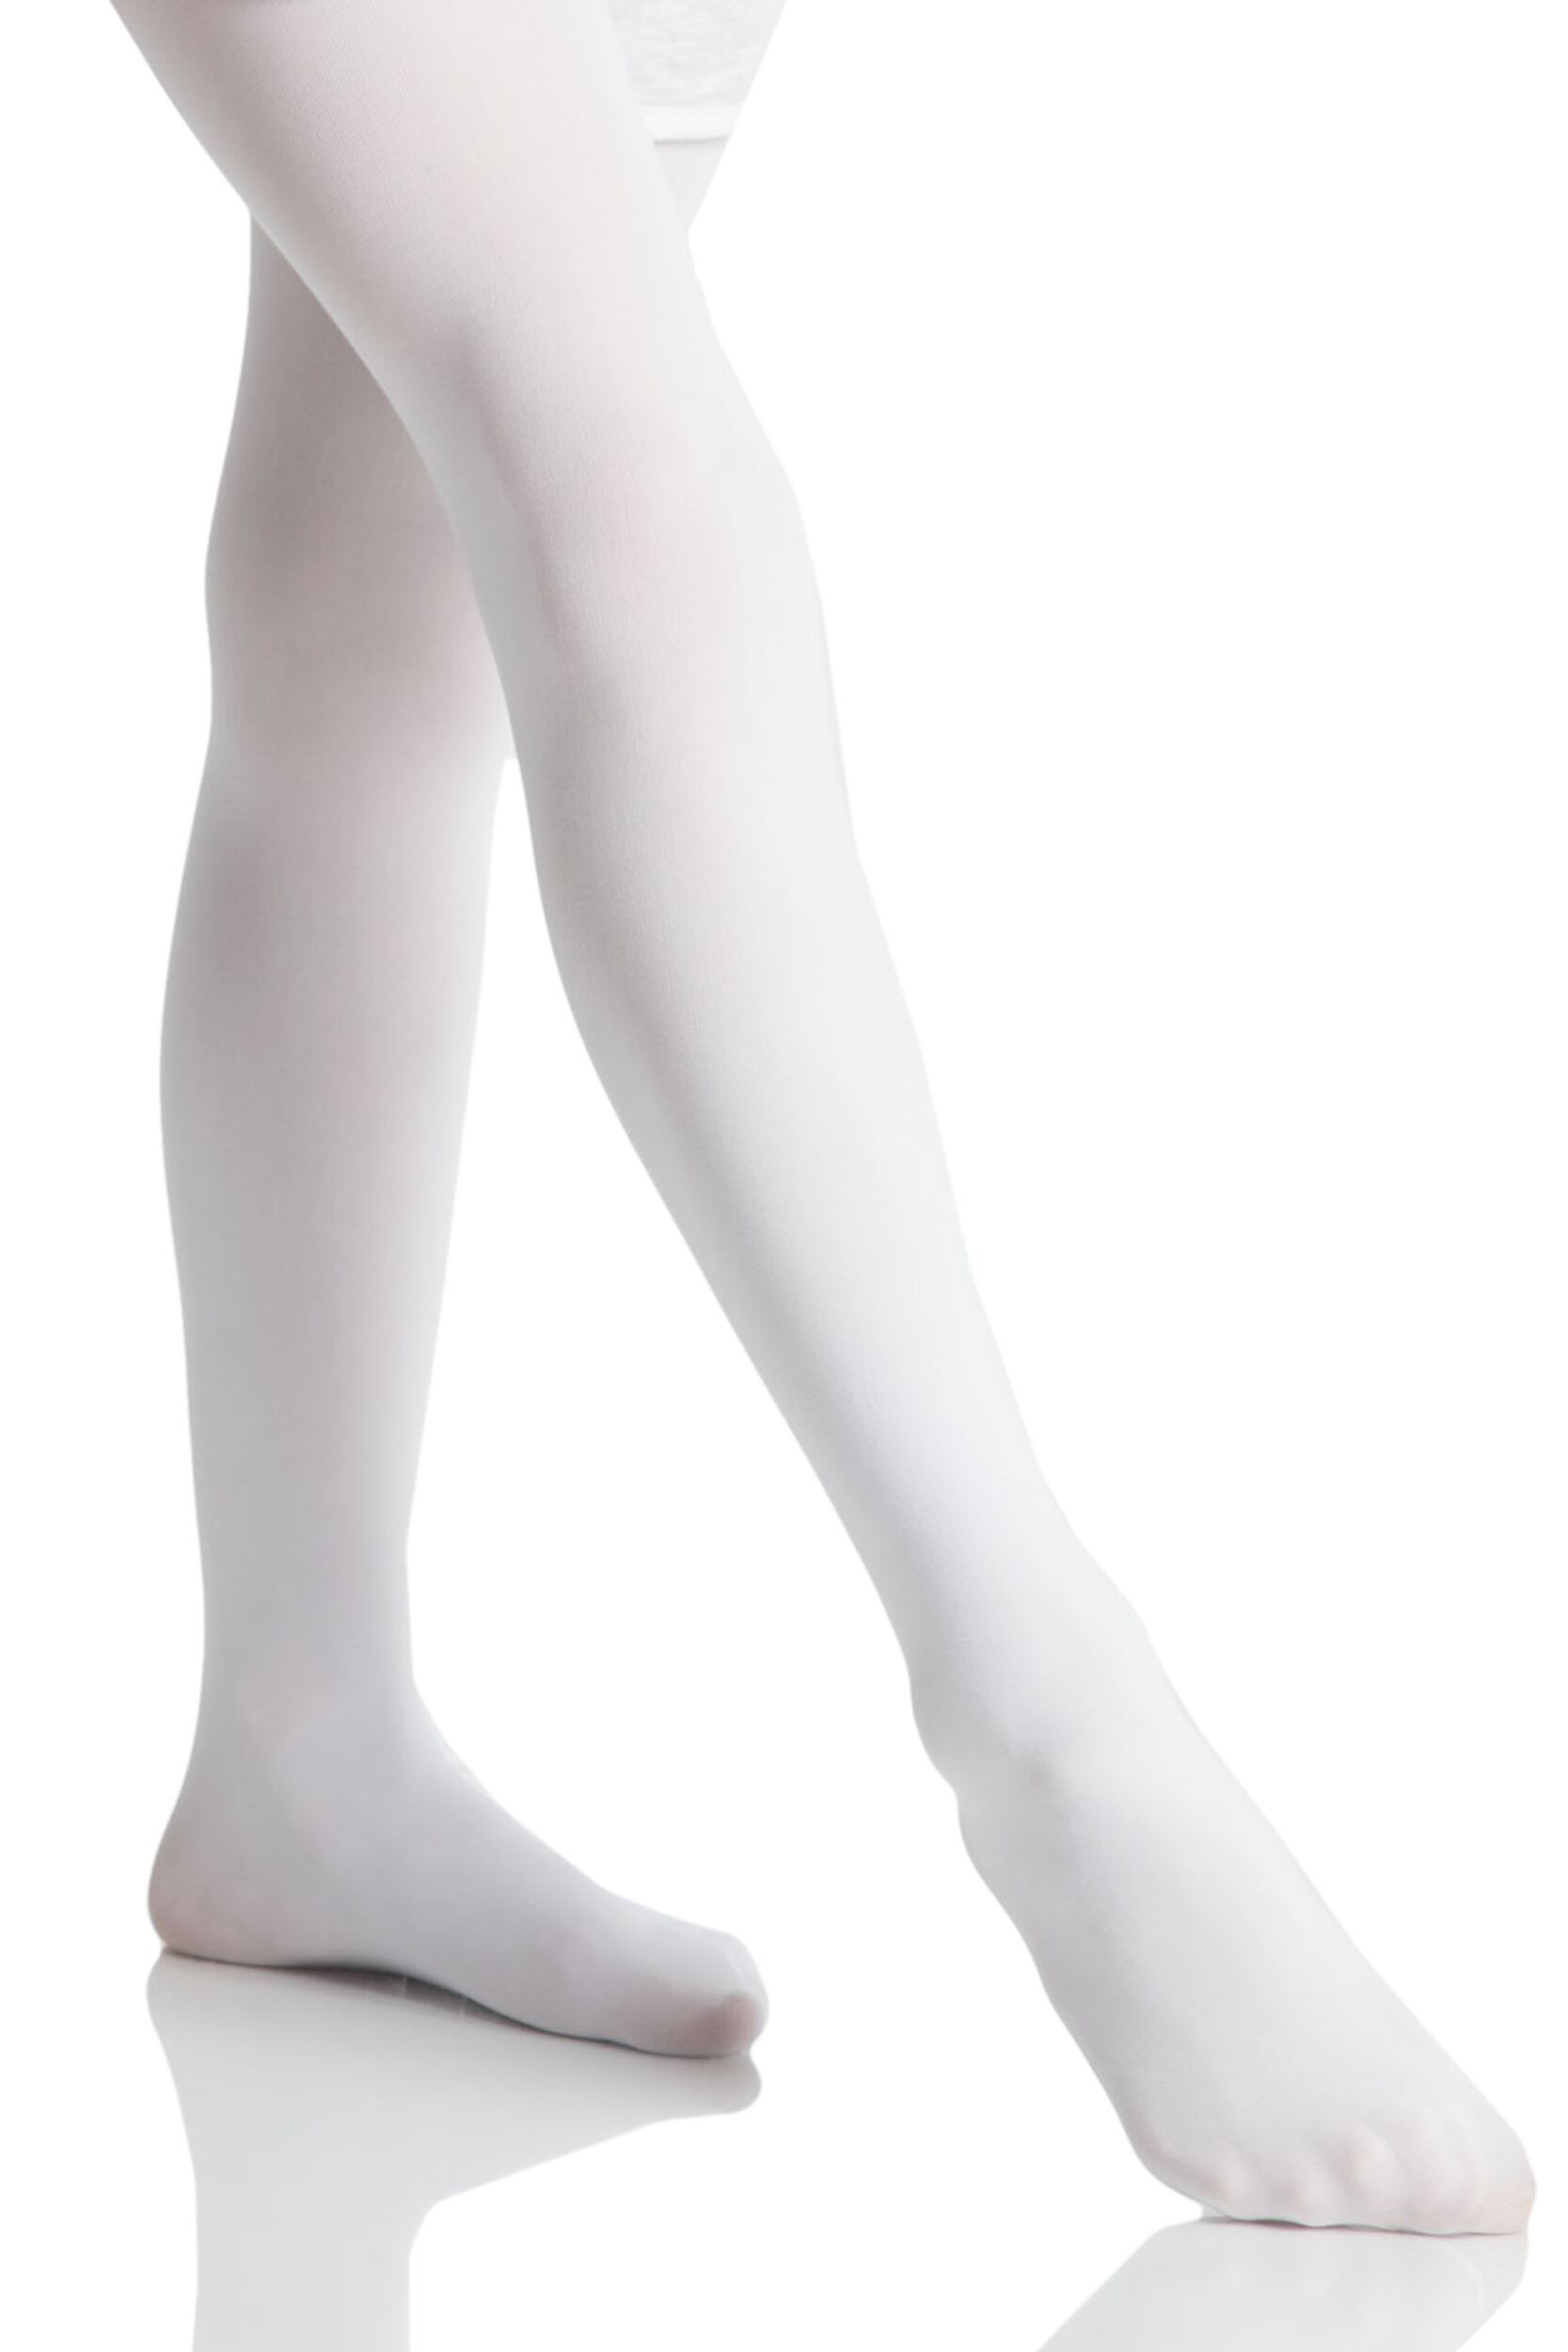 Image of Girls 1 Pair Silky Ballet Foot Tights